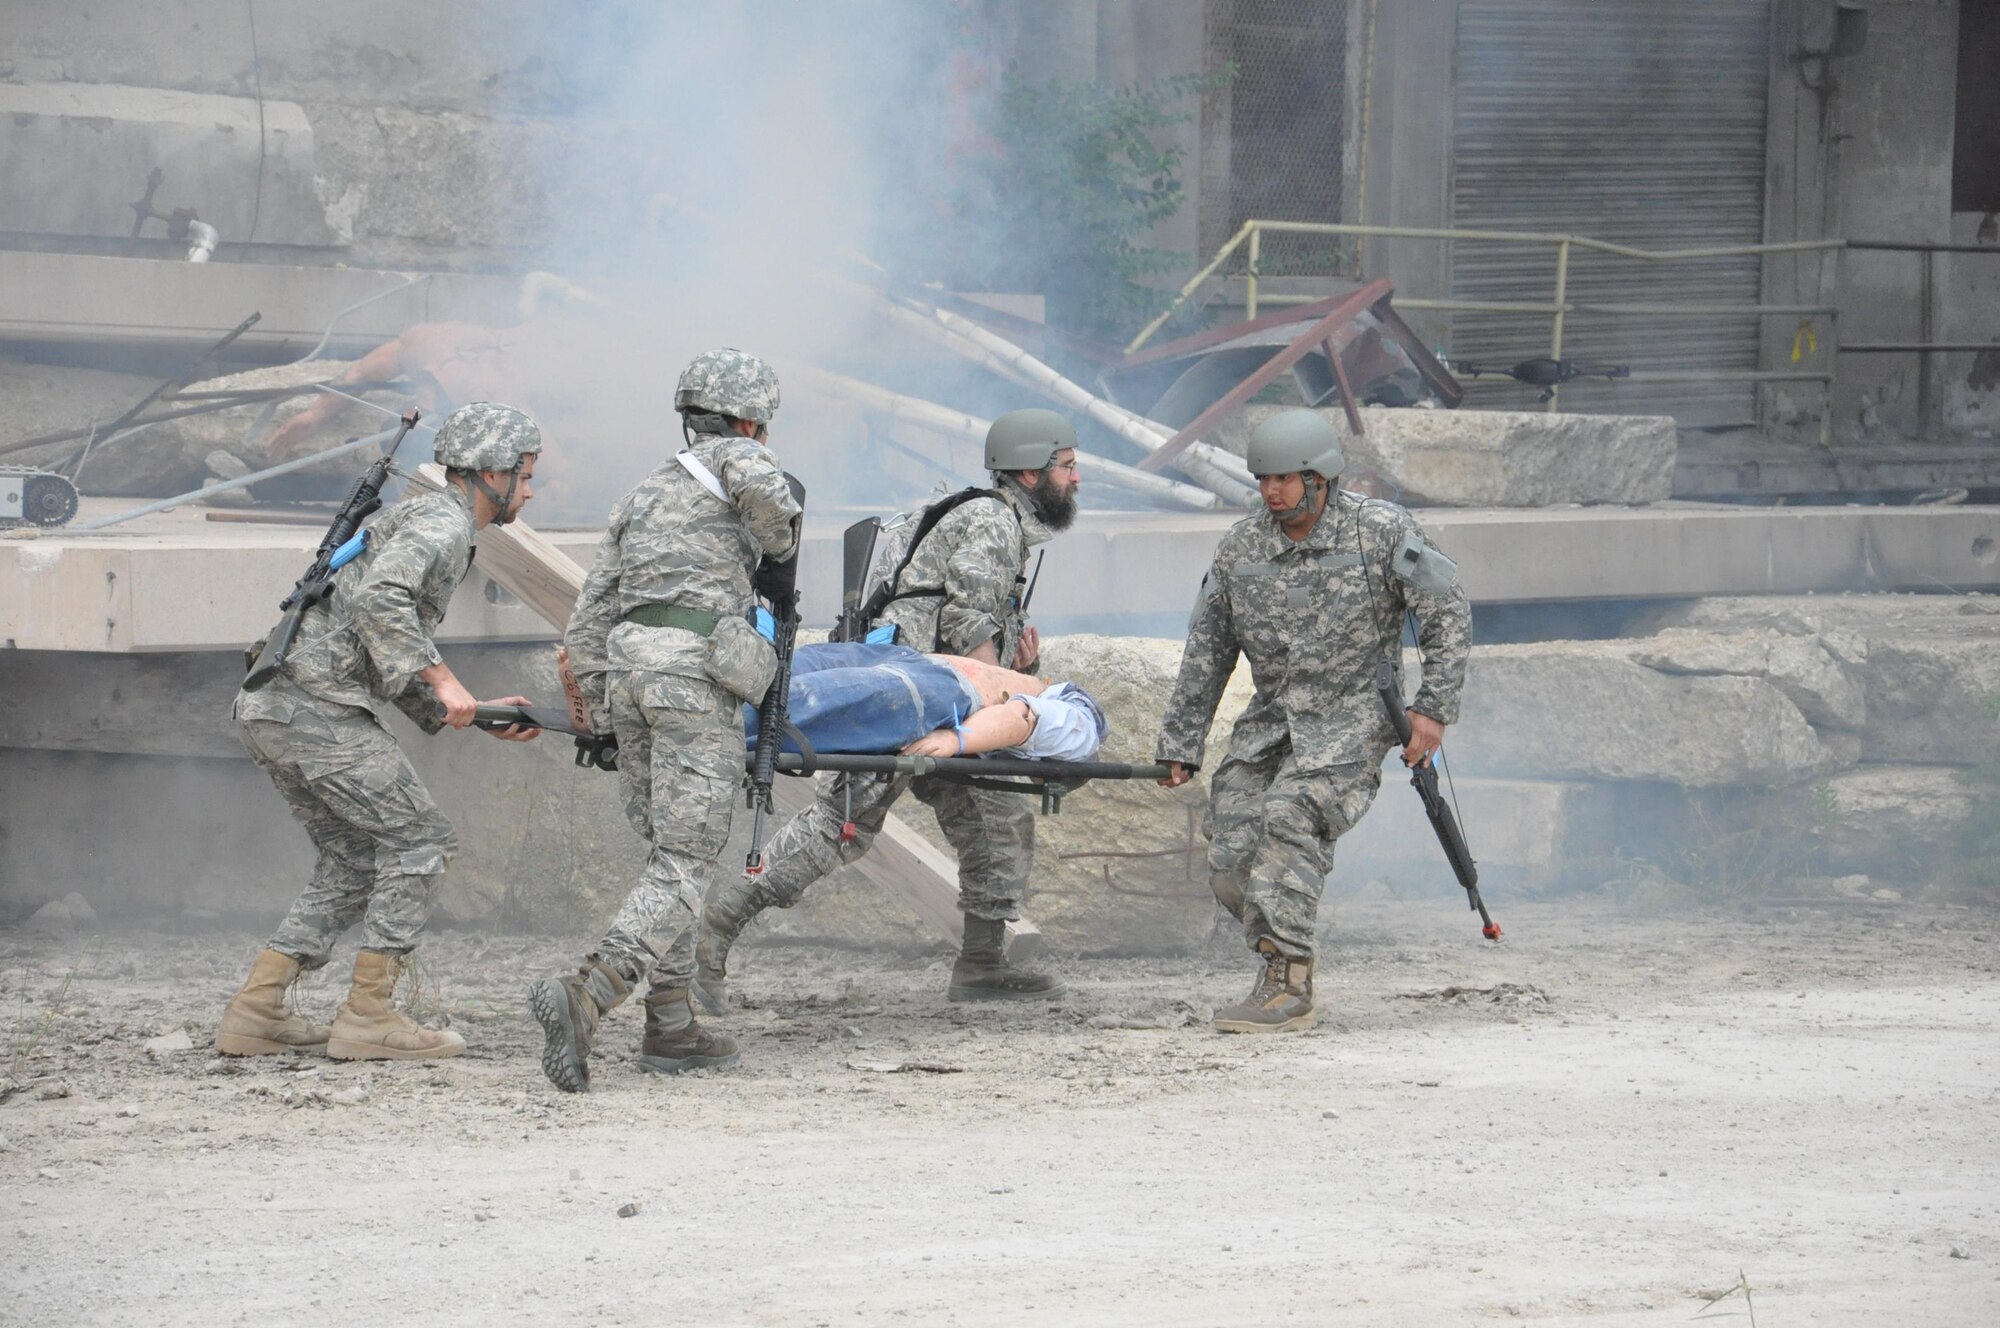 Air Force Research Laboratory Tech Warrior 2016 participants transport a casualty during a simulated battlefield scenario. The immersive experience is designed to give scientists and engineers insight into the battlefield environment in order to help in their design and function, of products and services, for the warfighter. (U.S. Air Force photo / Bill Hancock)